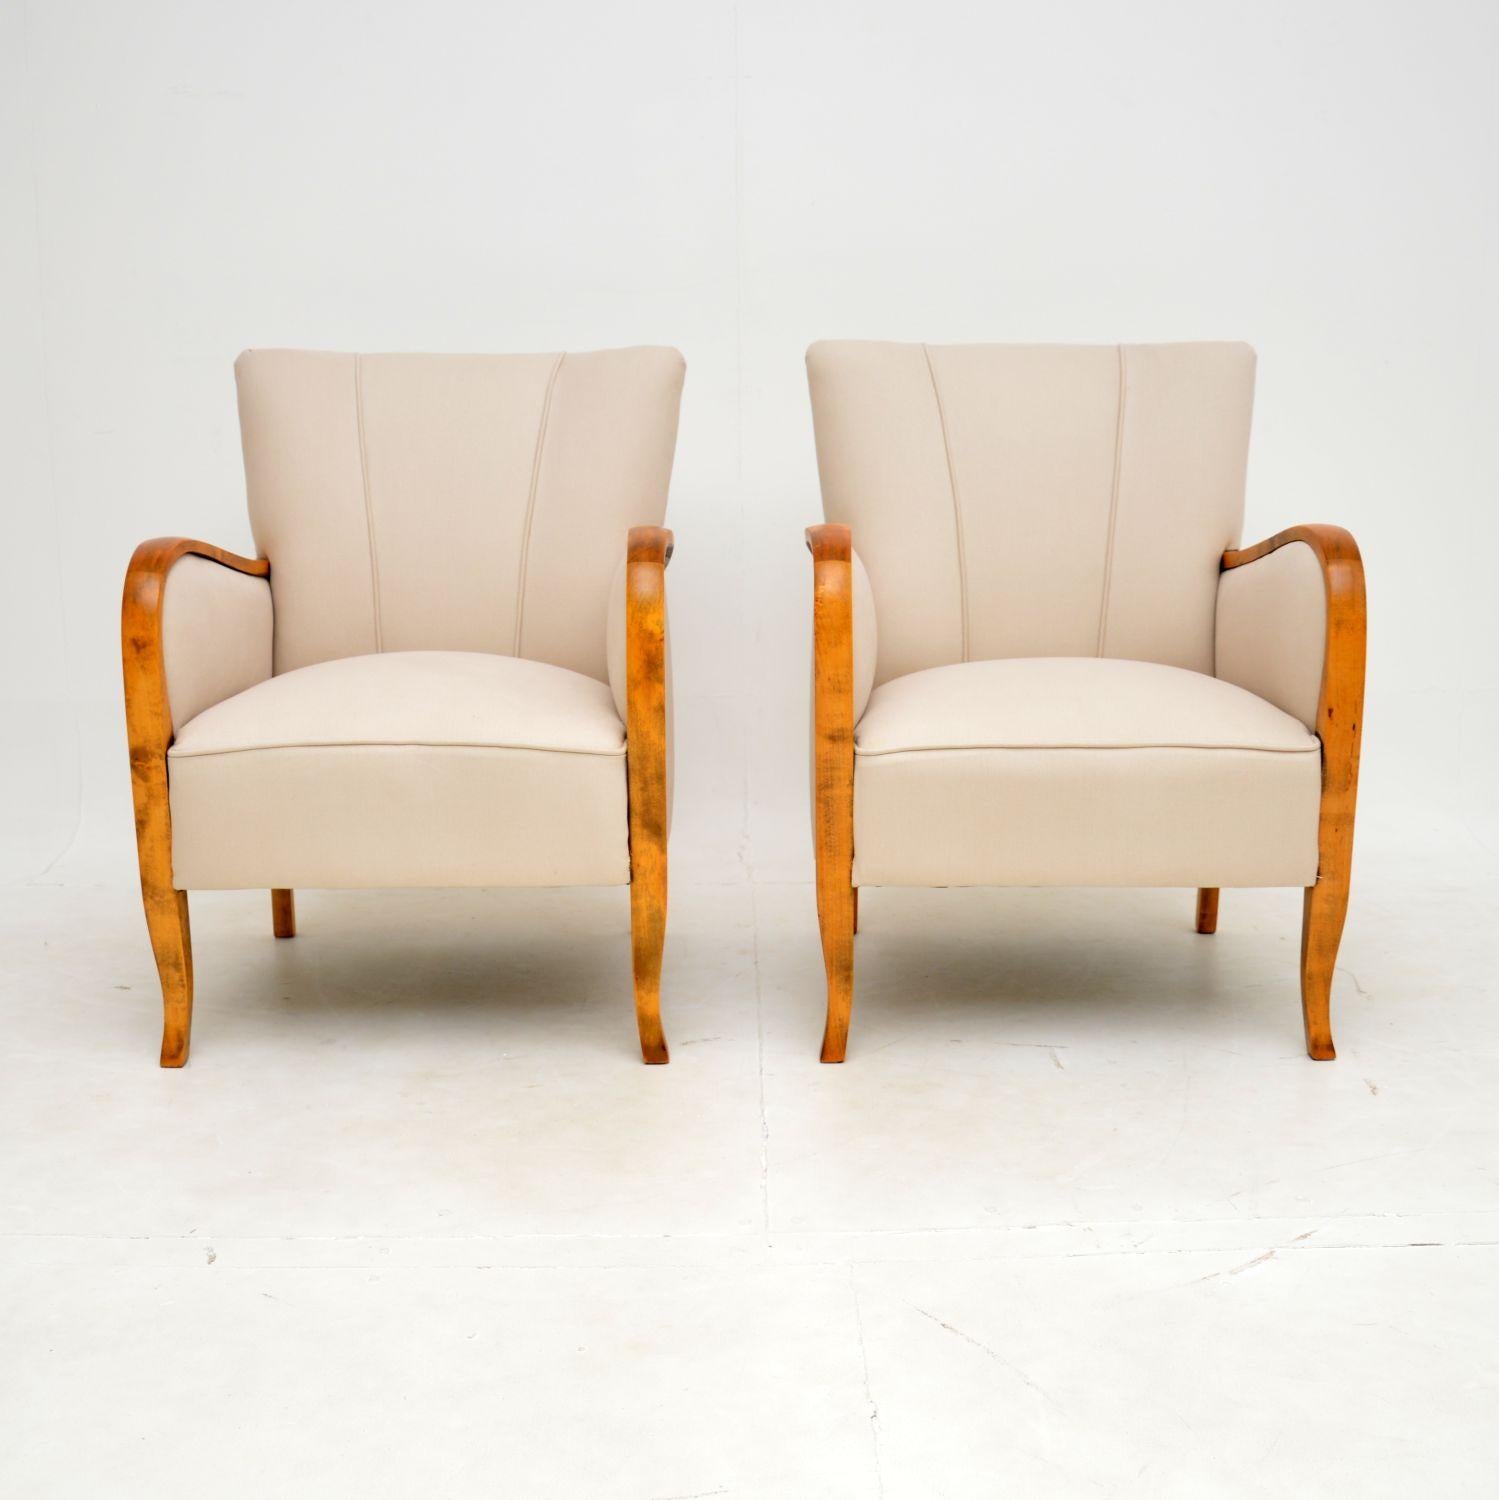 A very stylish and extremely well made pair of Swedish Art Deco period armchairs. They were recently imported from Sweden, they date from the 1920-30’s.

They have lovely proportions and are very comfortable. The quality is amazing, with scalloped